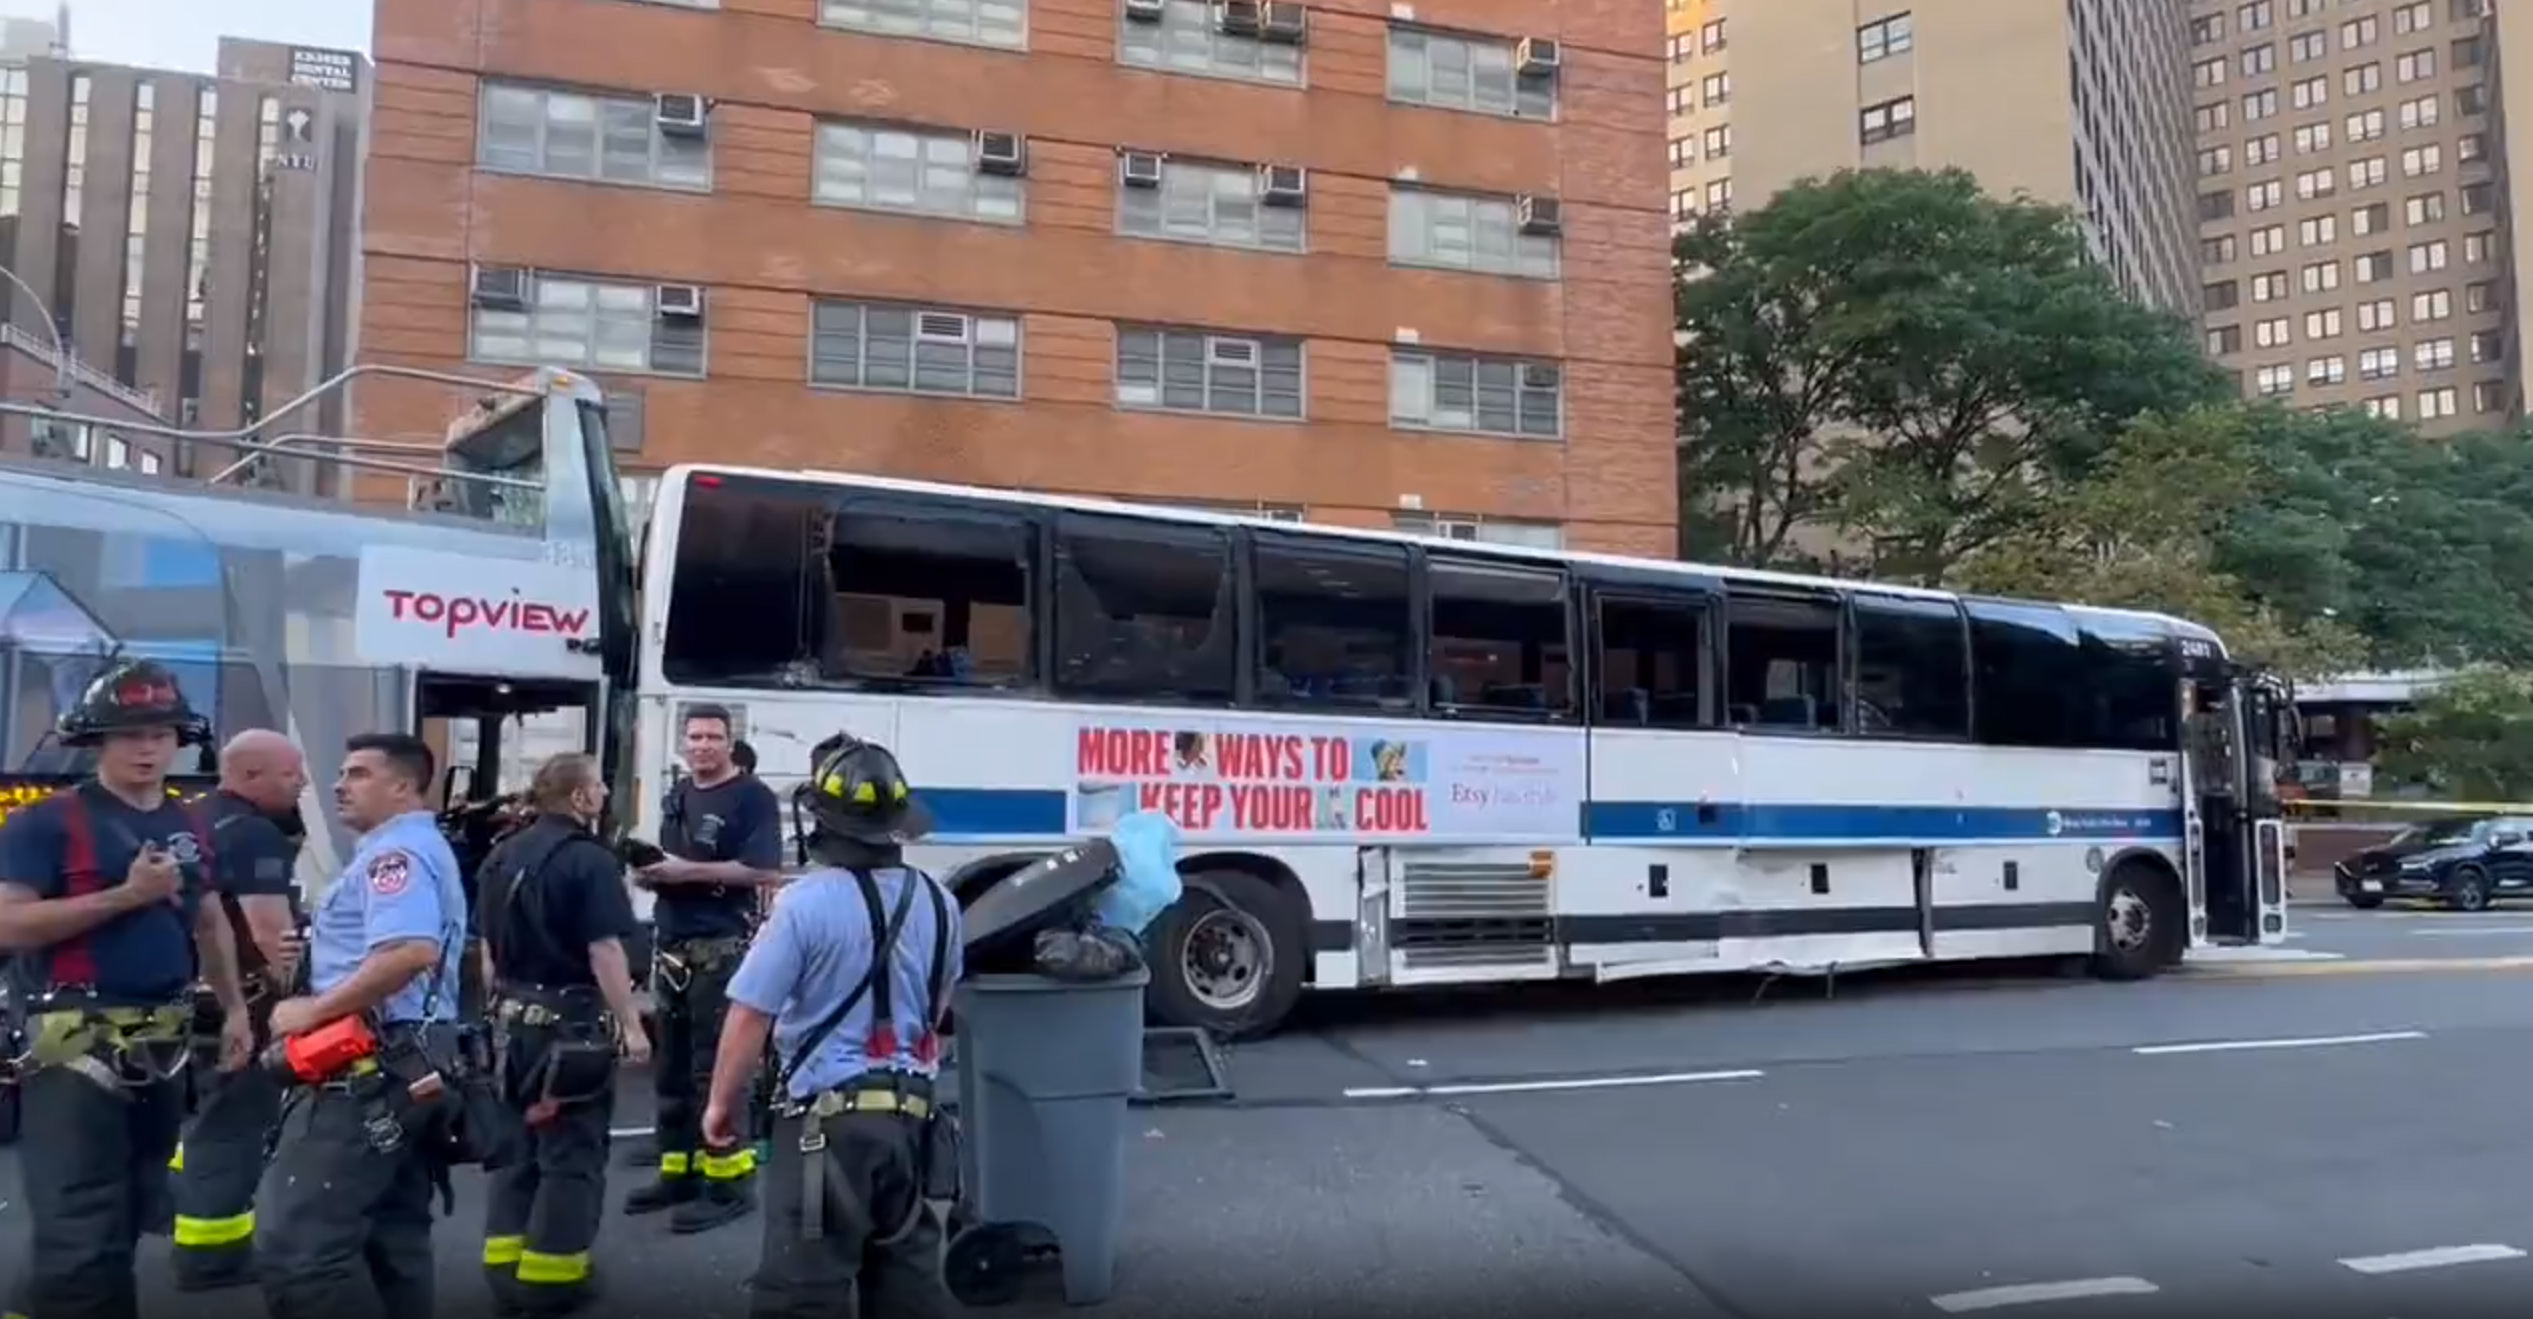 PHOTO: In this screen grab from a video, first responders are shown at the scene of a bus crash in New York, on July 6, 2023.